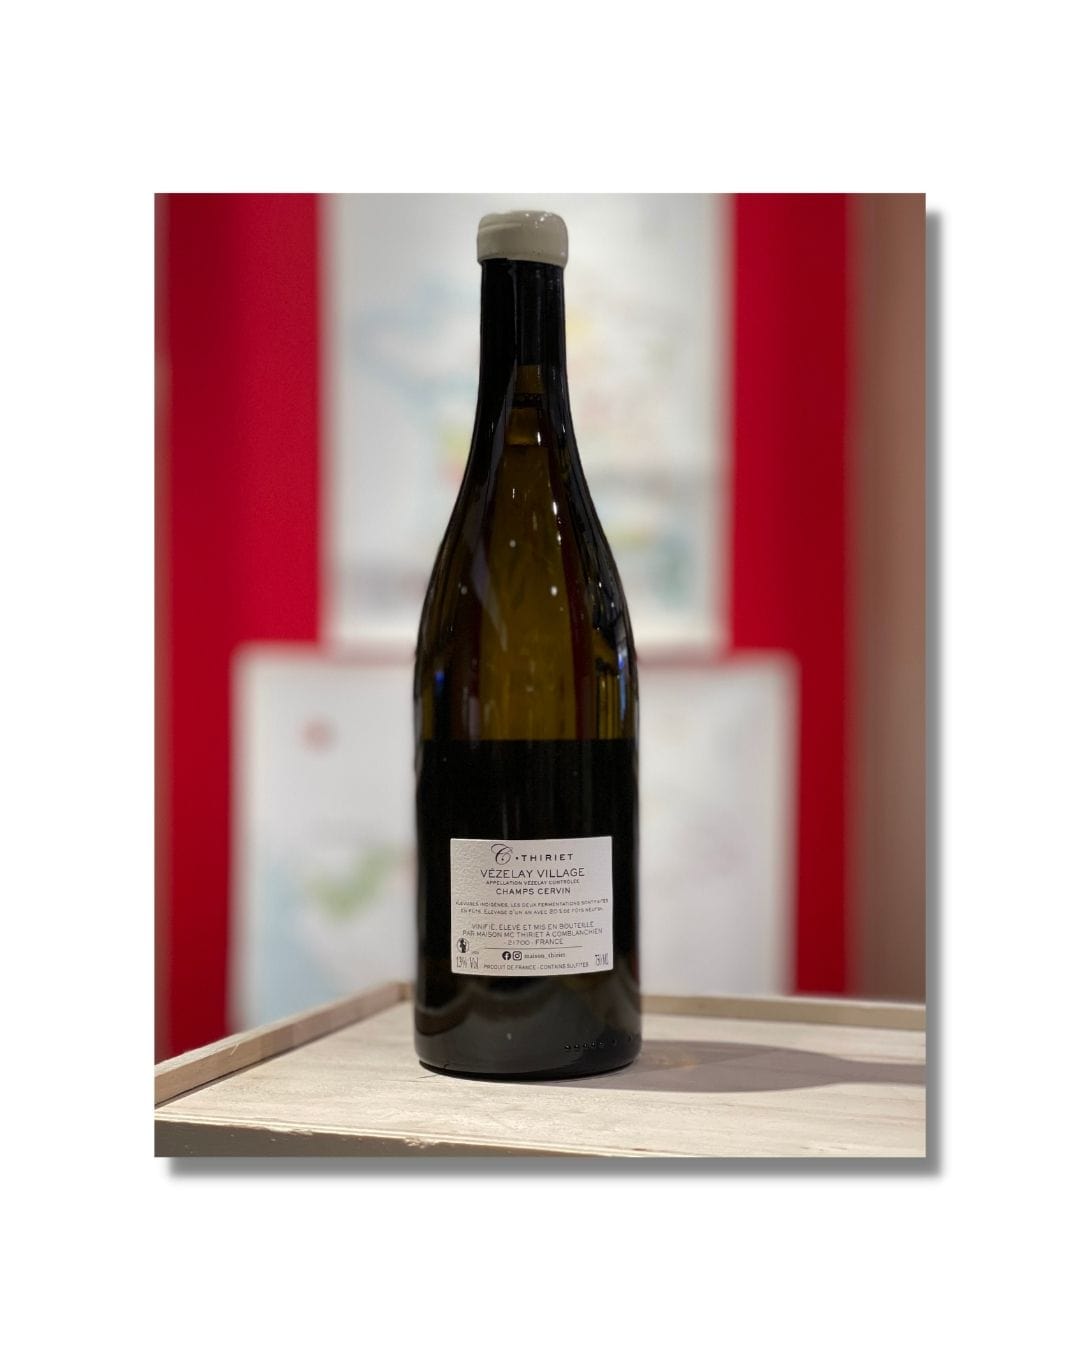 Shop Maison Thiriet Maison Thiriet Vezelay Champs Cervin 2020 online at PENTICTON artisanal French wine store in Hong Kong. Discover other French wines, promotions, workshops and featured offers at pentictonpacific.com 